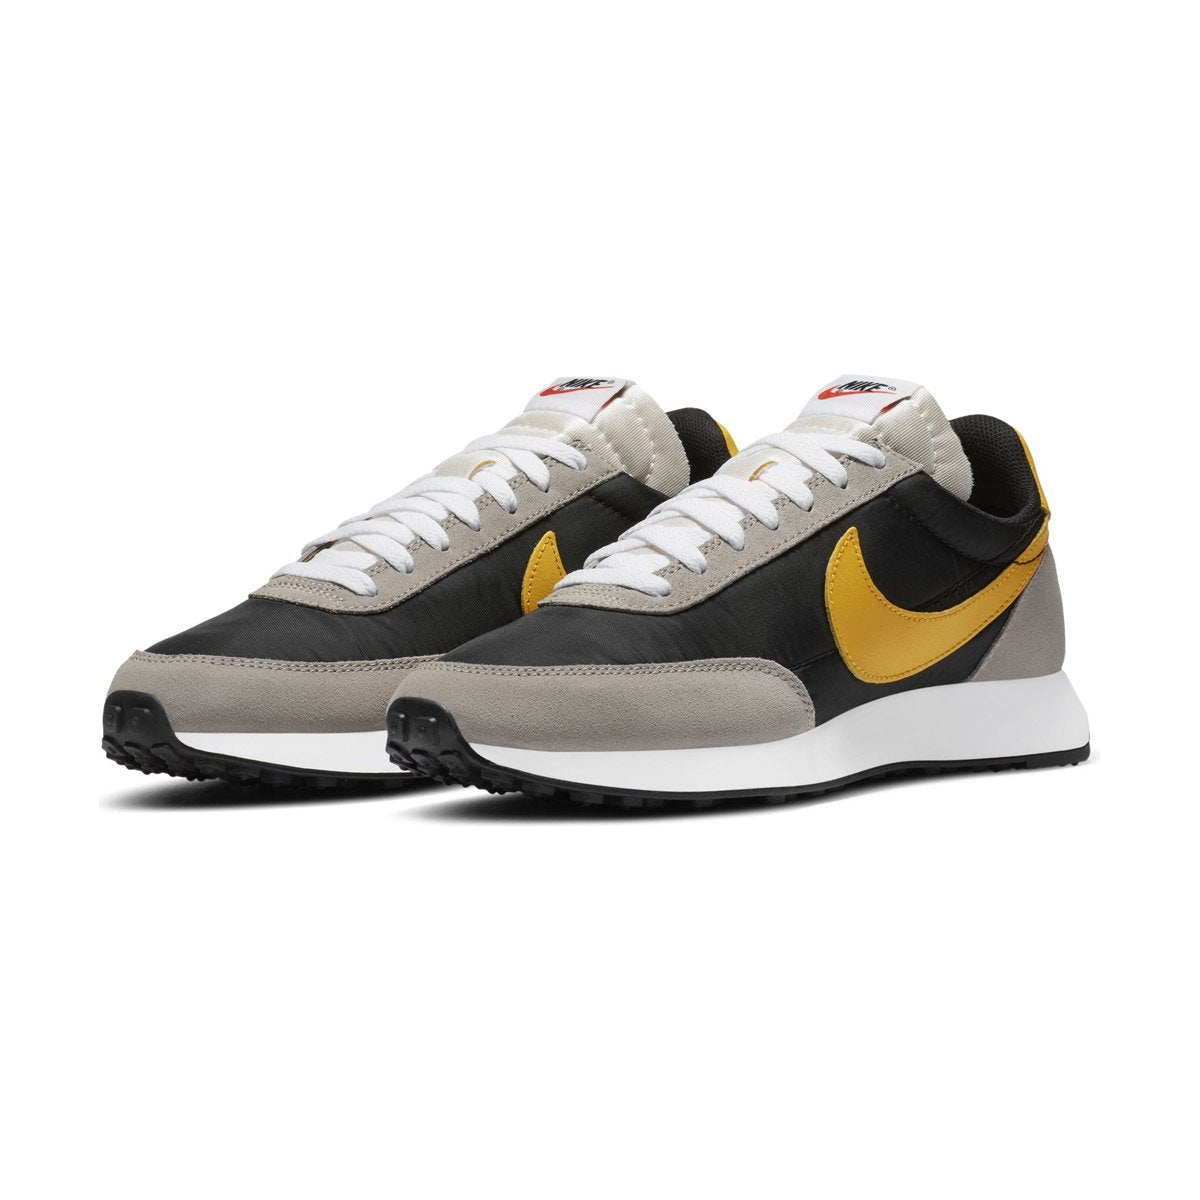 Men's Nike Air Tailwind - Shoes